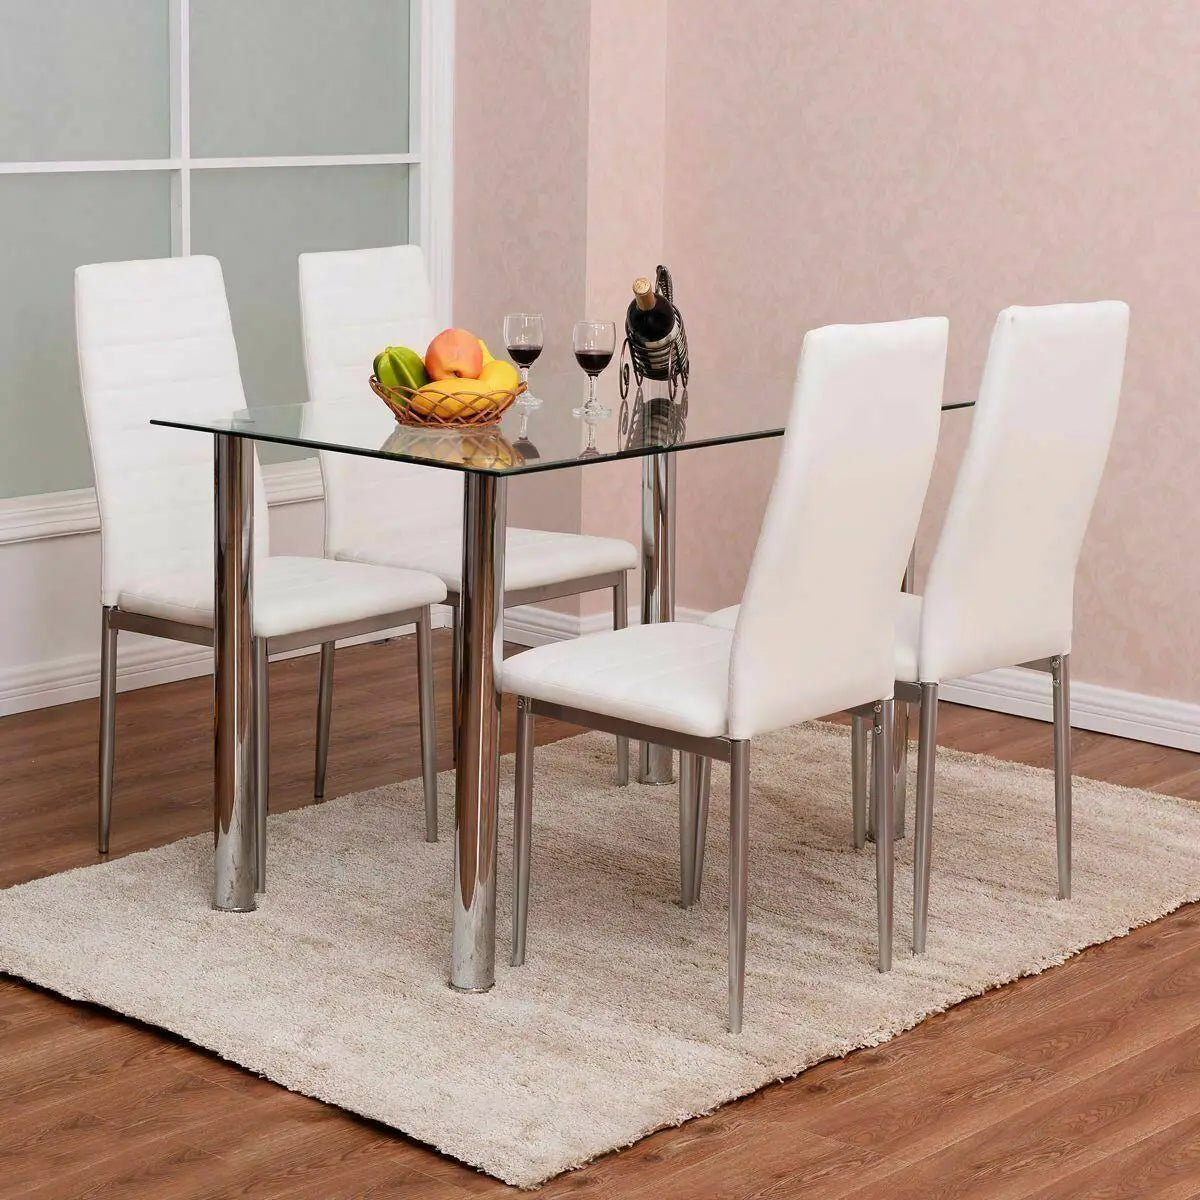 5Pcs Dining Set Kitchen Room Table Set Dining Table and 4 Leather Chairs